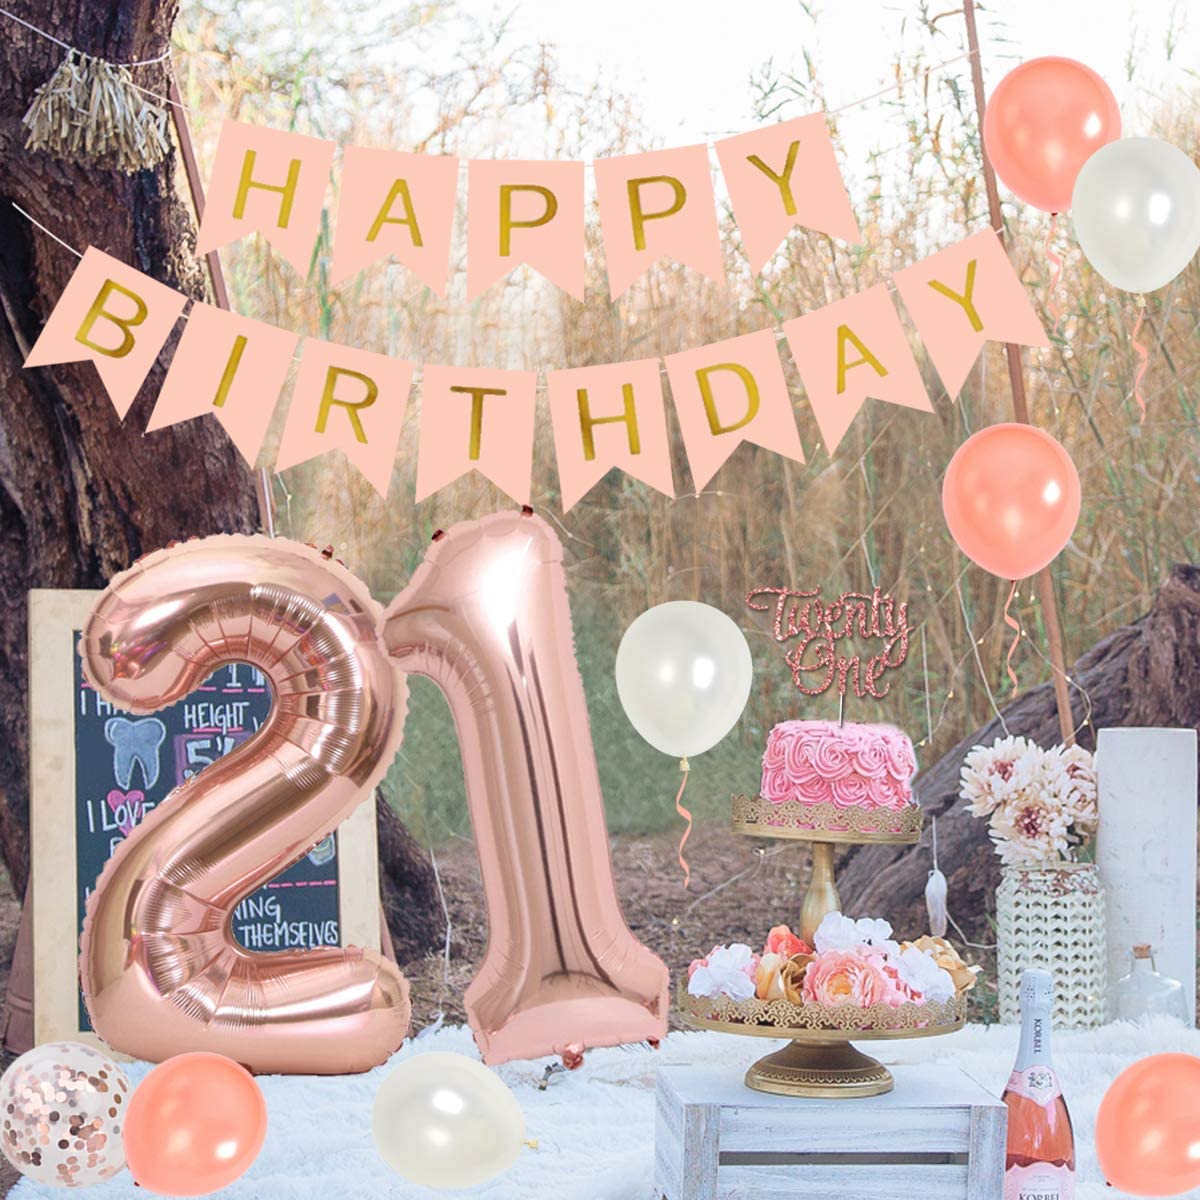 Finally 21 Sash Silver Curtain Backdrop Glitter Cake Topper Number 21 Foil Balloons Kreatwow 21st Birthday Party Decorations Rose Gold 